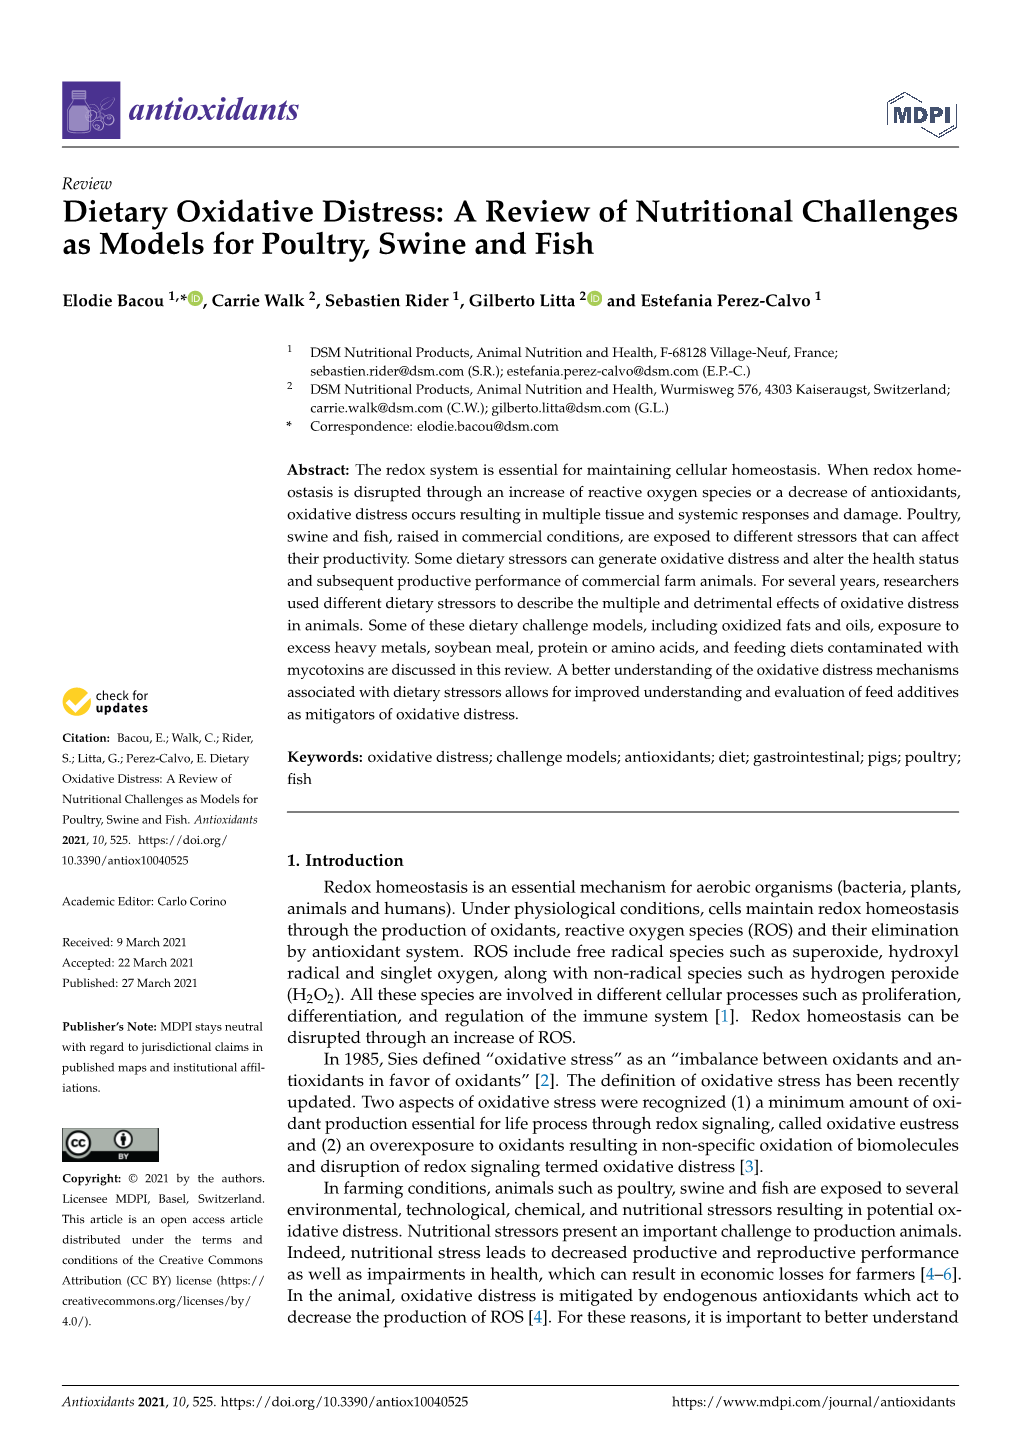 A Review of Nutritional Challenges As Models for Poultry, Swine and Fish